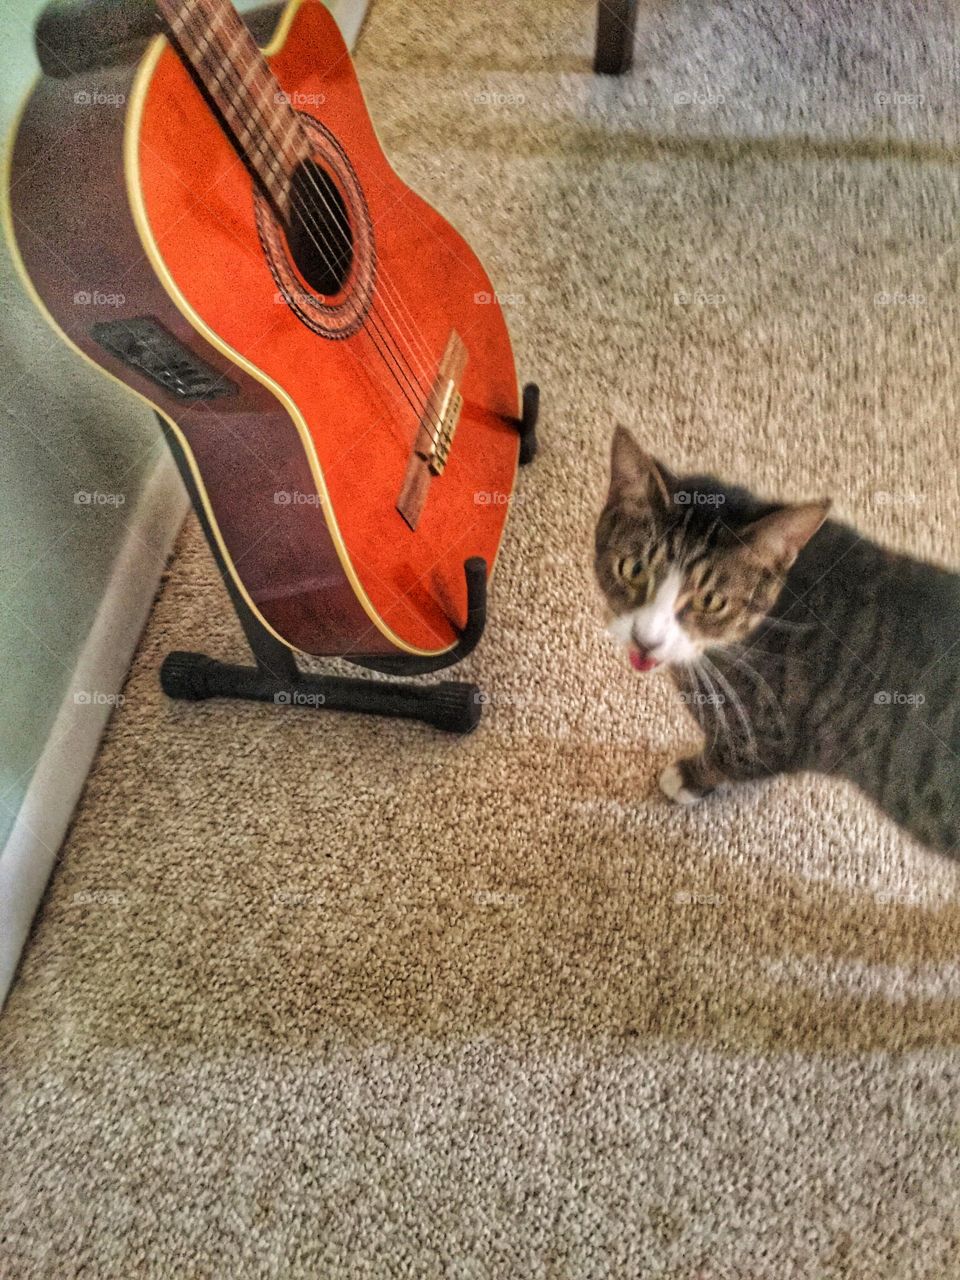 Singer Kitty. The cat was very territorial about the guitar. 